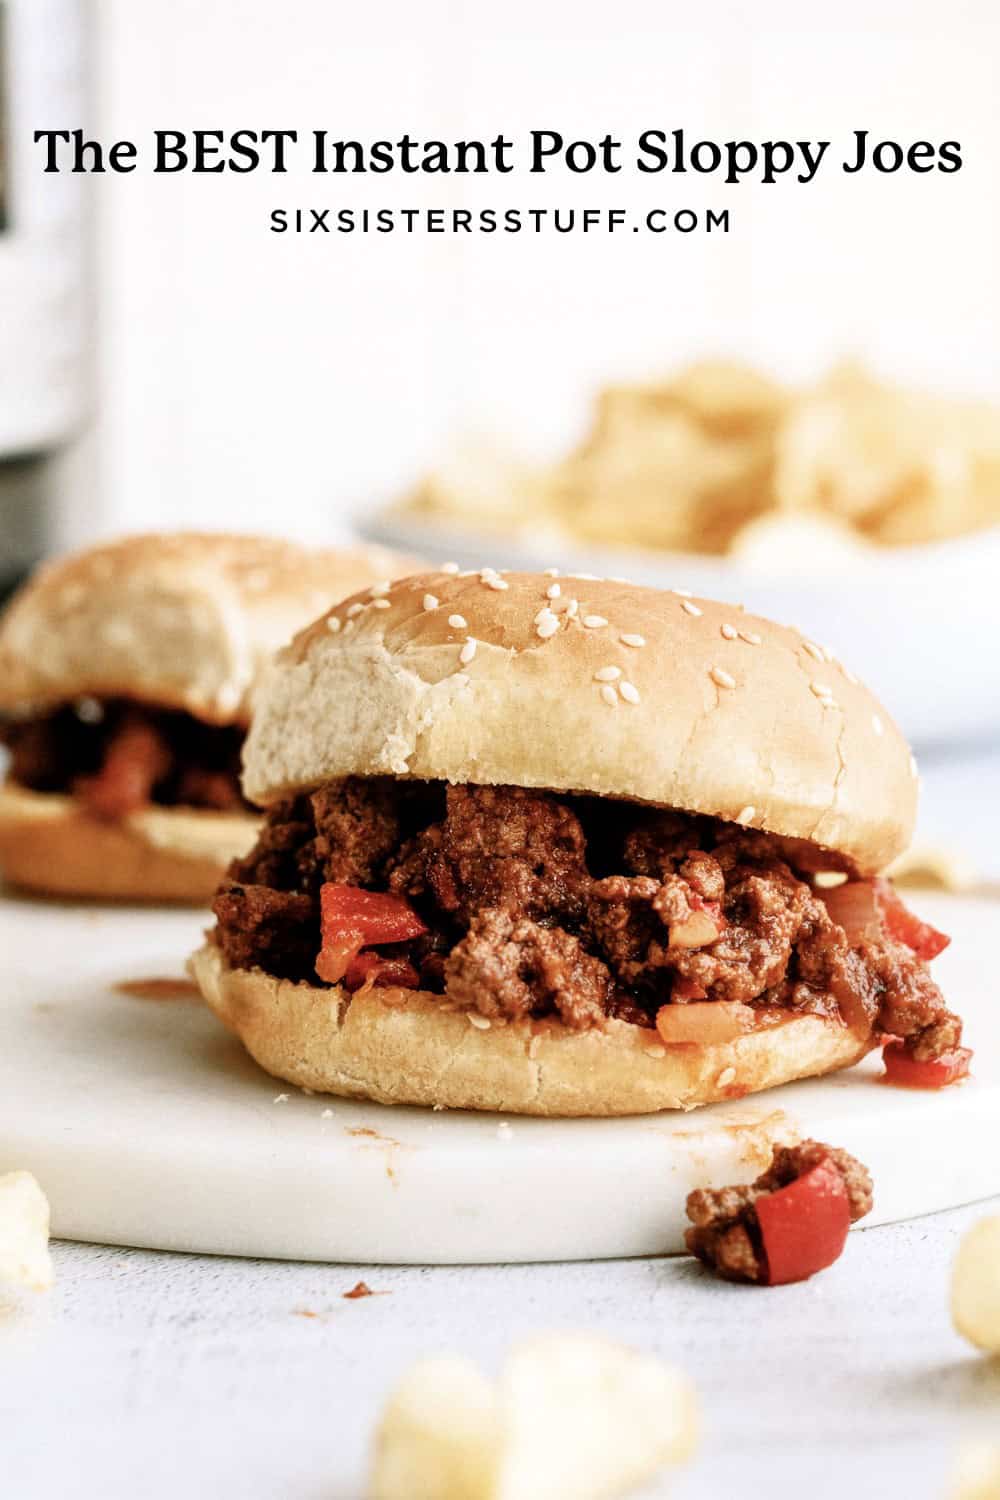 sloppy joes made in an instant pot on a platter